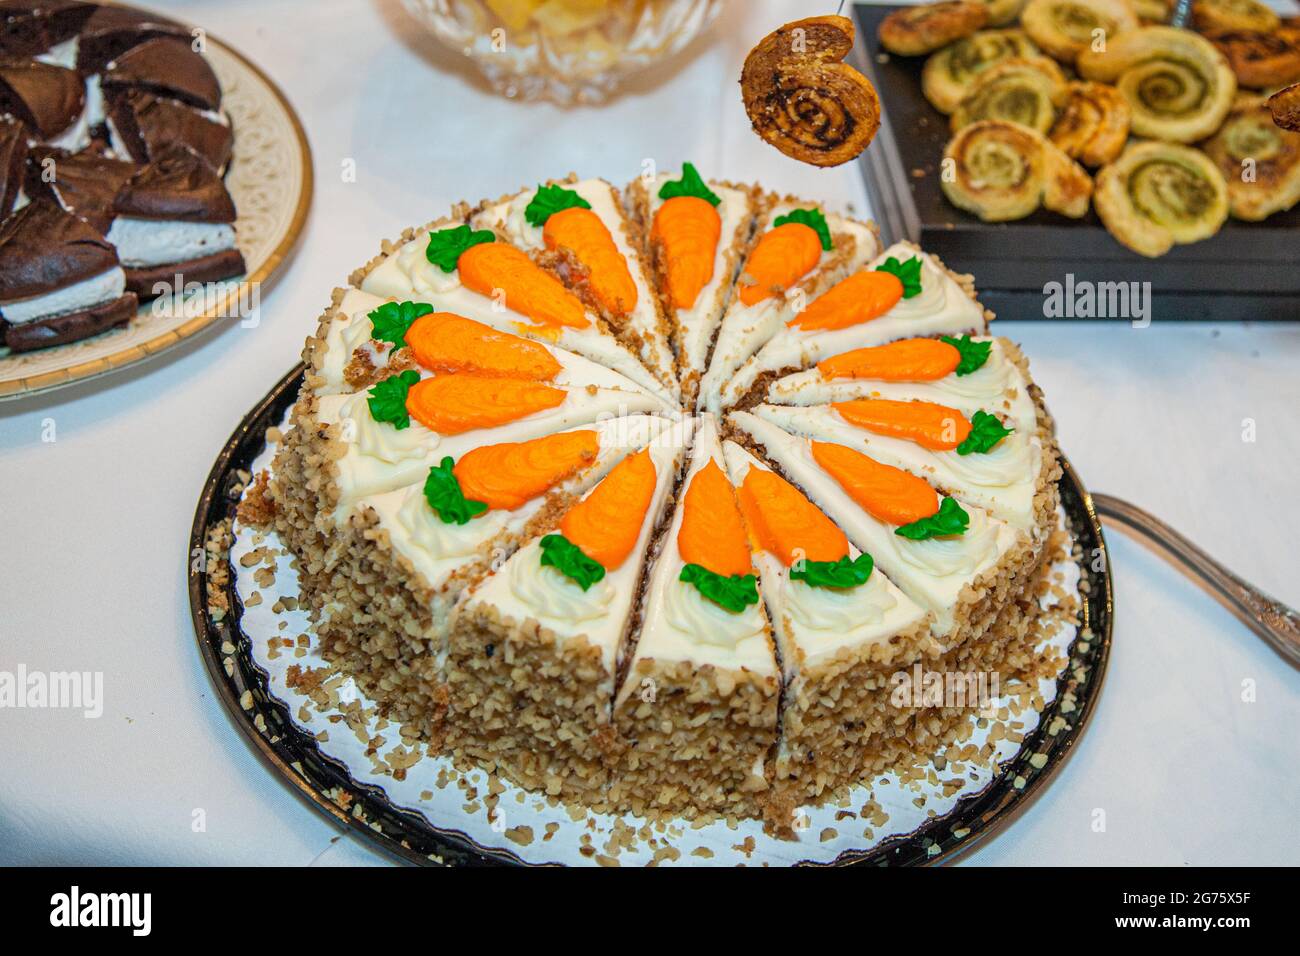 A colorful carrot cake Stock Photo